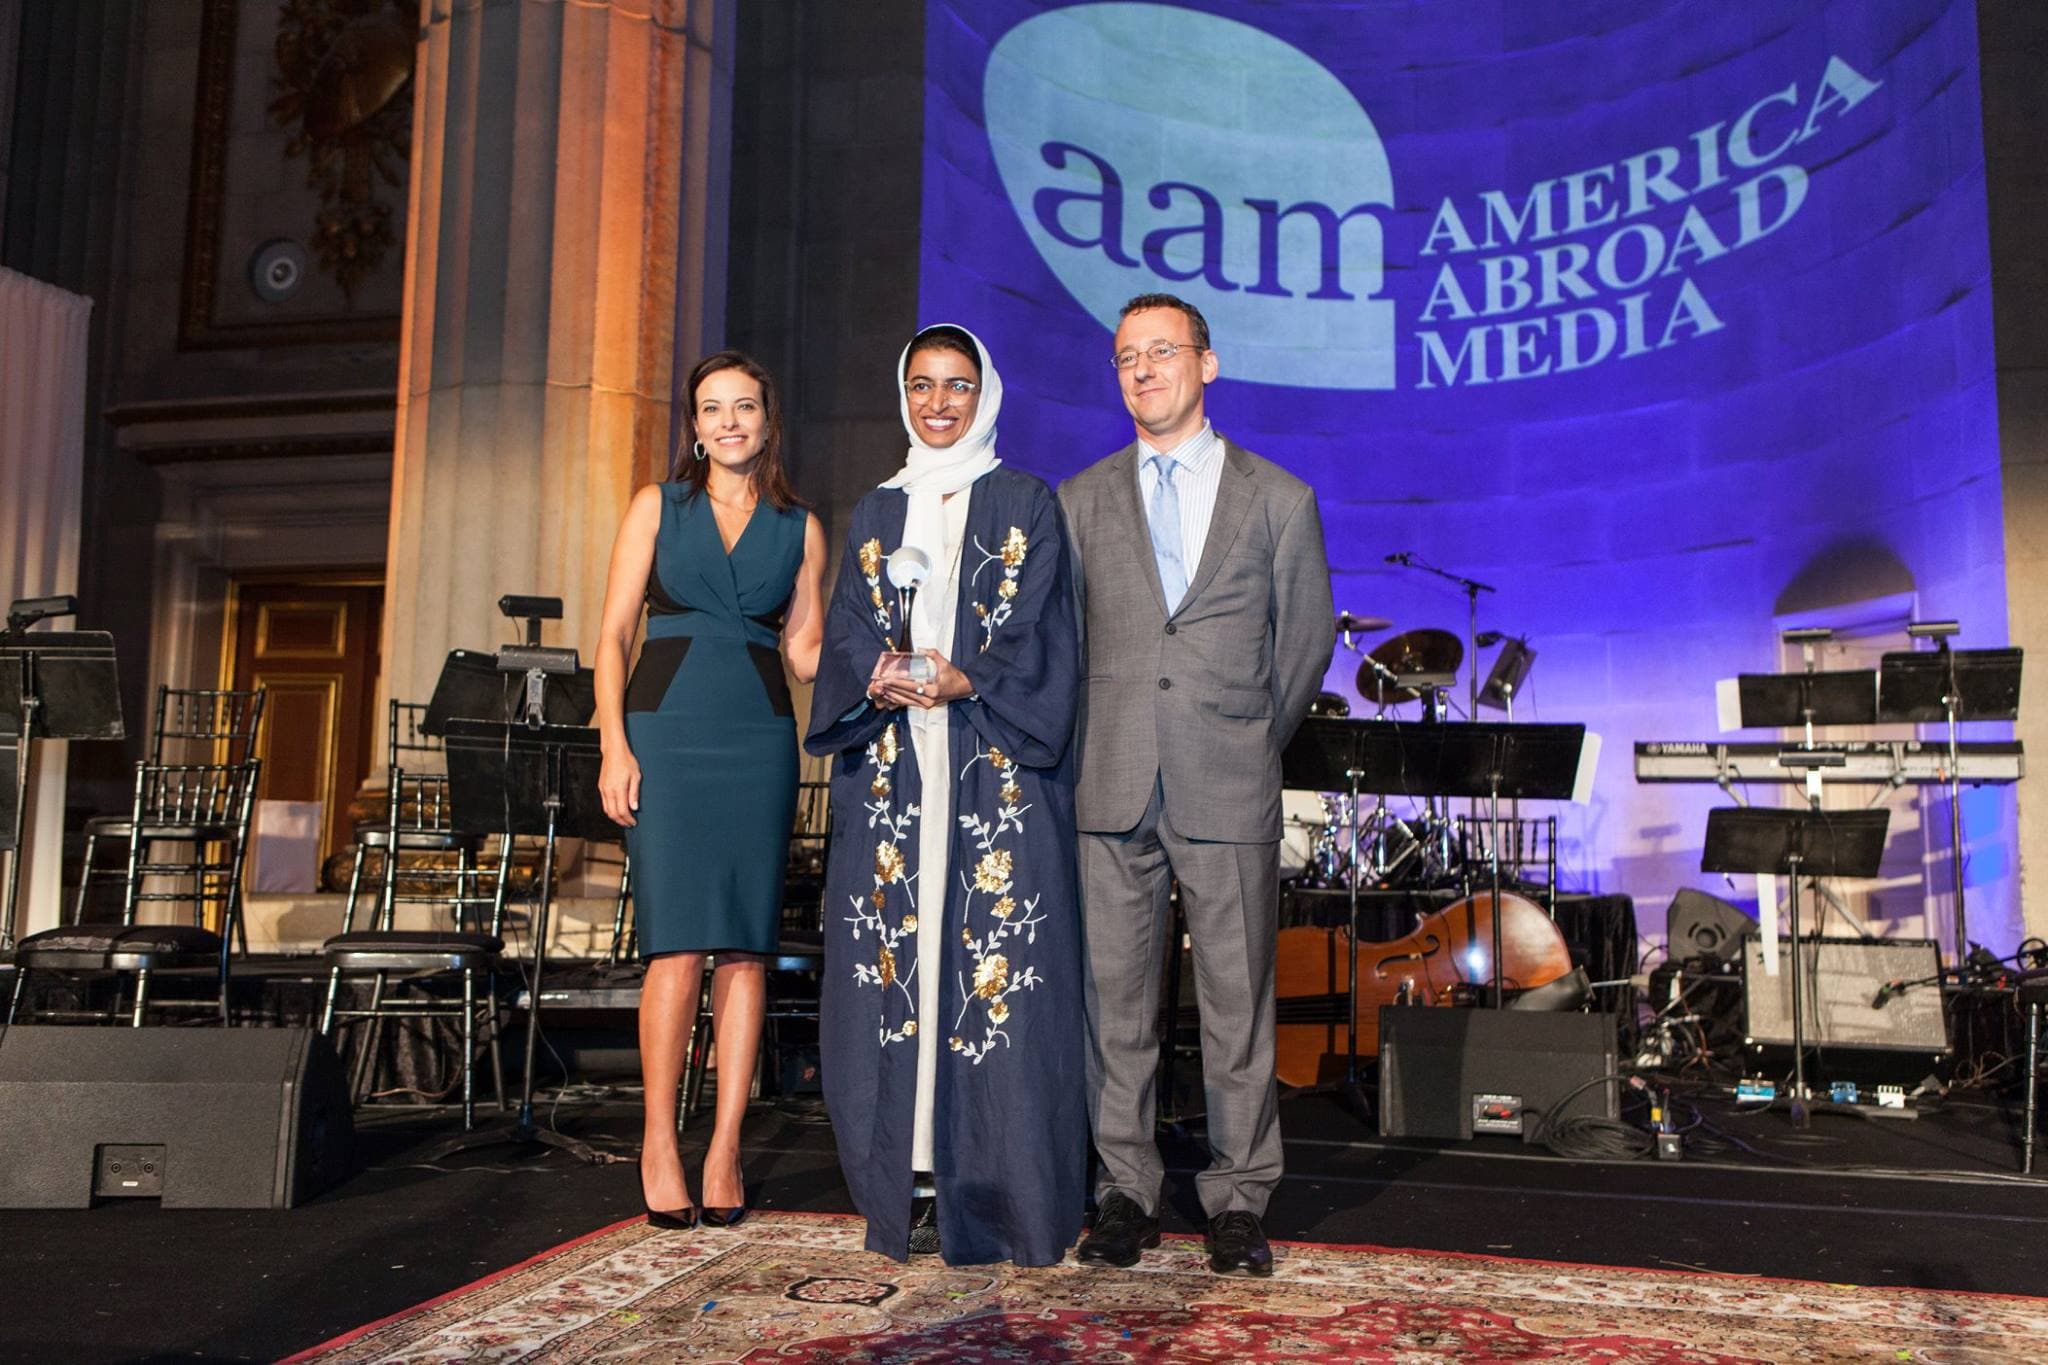 America Abroad Media honored Twofour54 Abu Dhabi CEO Noura Al Kaabi for her role in leading the United Arab Emirates’s growing media industry at their “Power of Film” Awards Dinner at the Andrew W. Mellon Auditorium in Washington, D.C. honoring outstanding leaders whose work exemplifies the power of media to inform, educate, and empower citizens on critical social and public policy issues. http://ow.ly/TY1bR